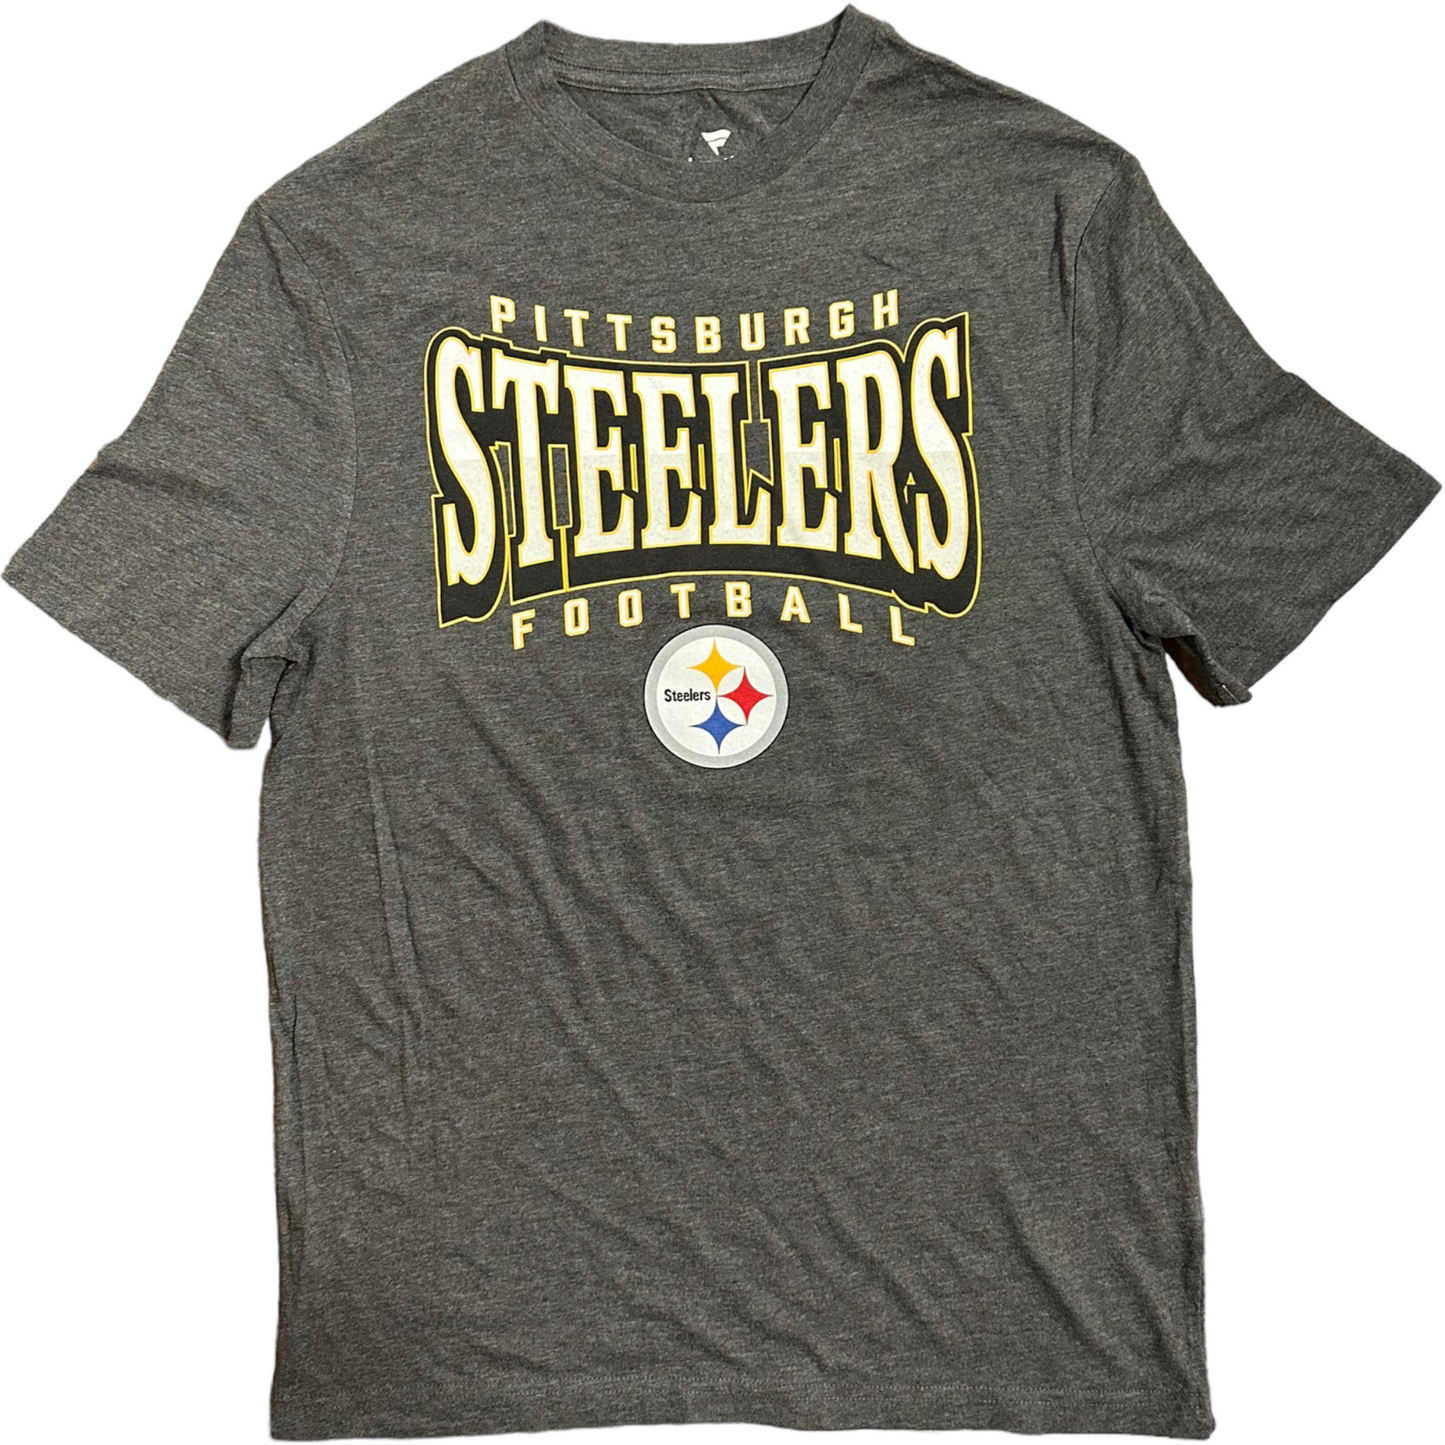 PITTSBURGH STEELERS MEN'S DIVIDED WRAP T-SHIRT